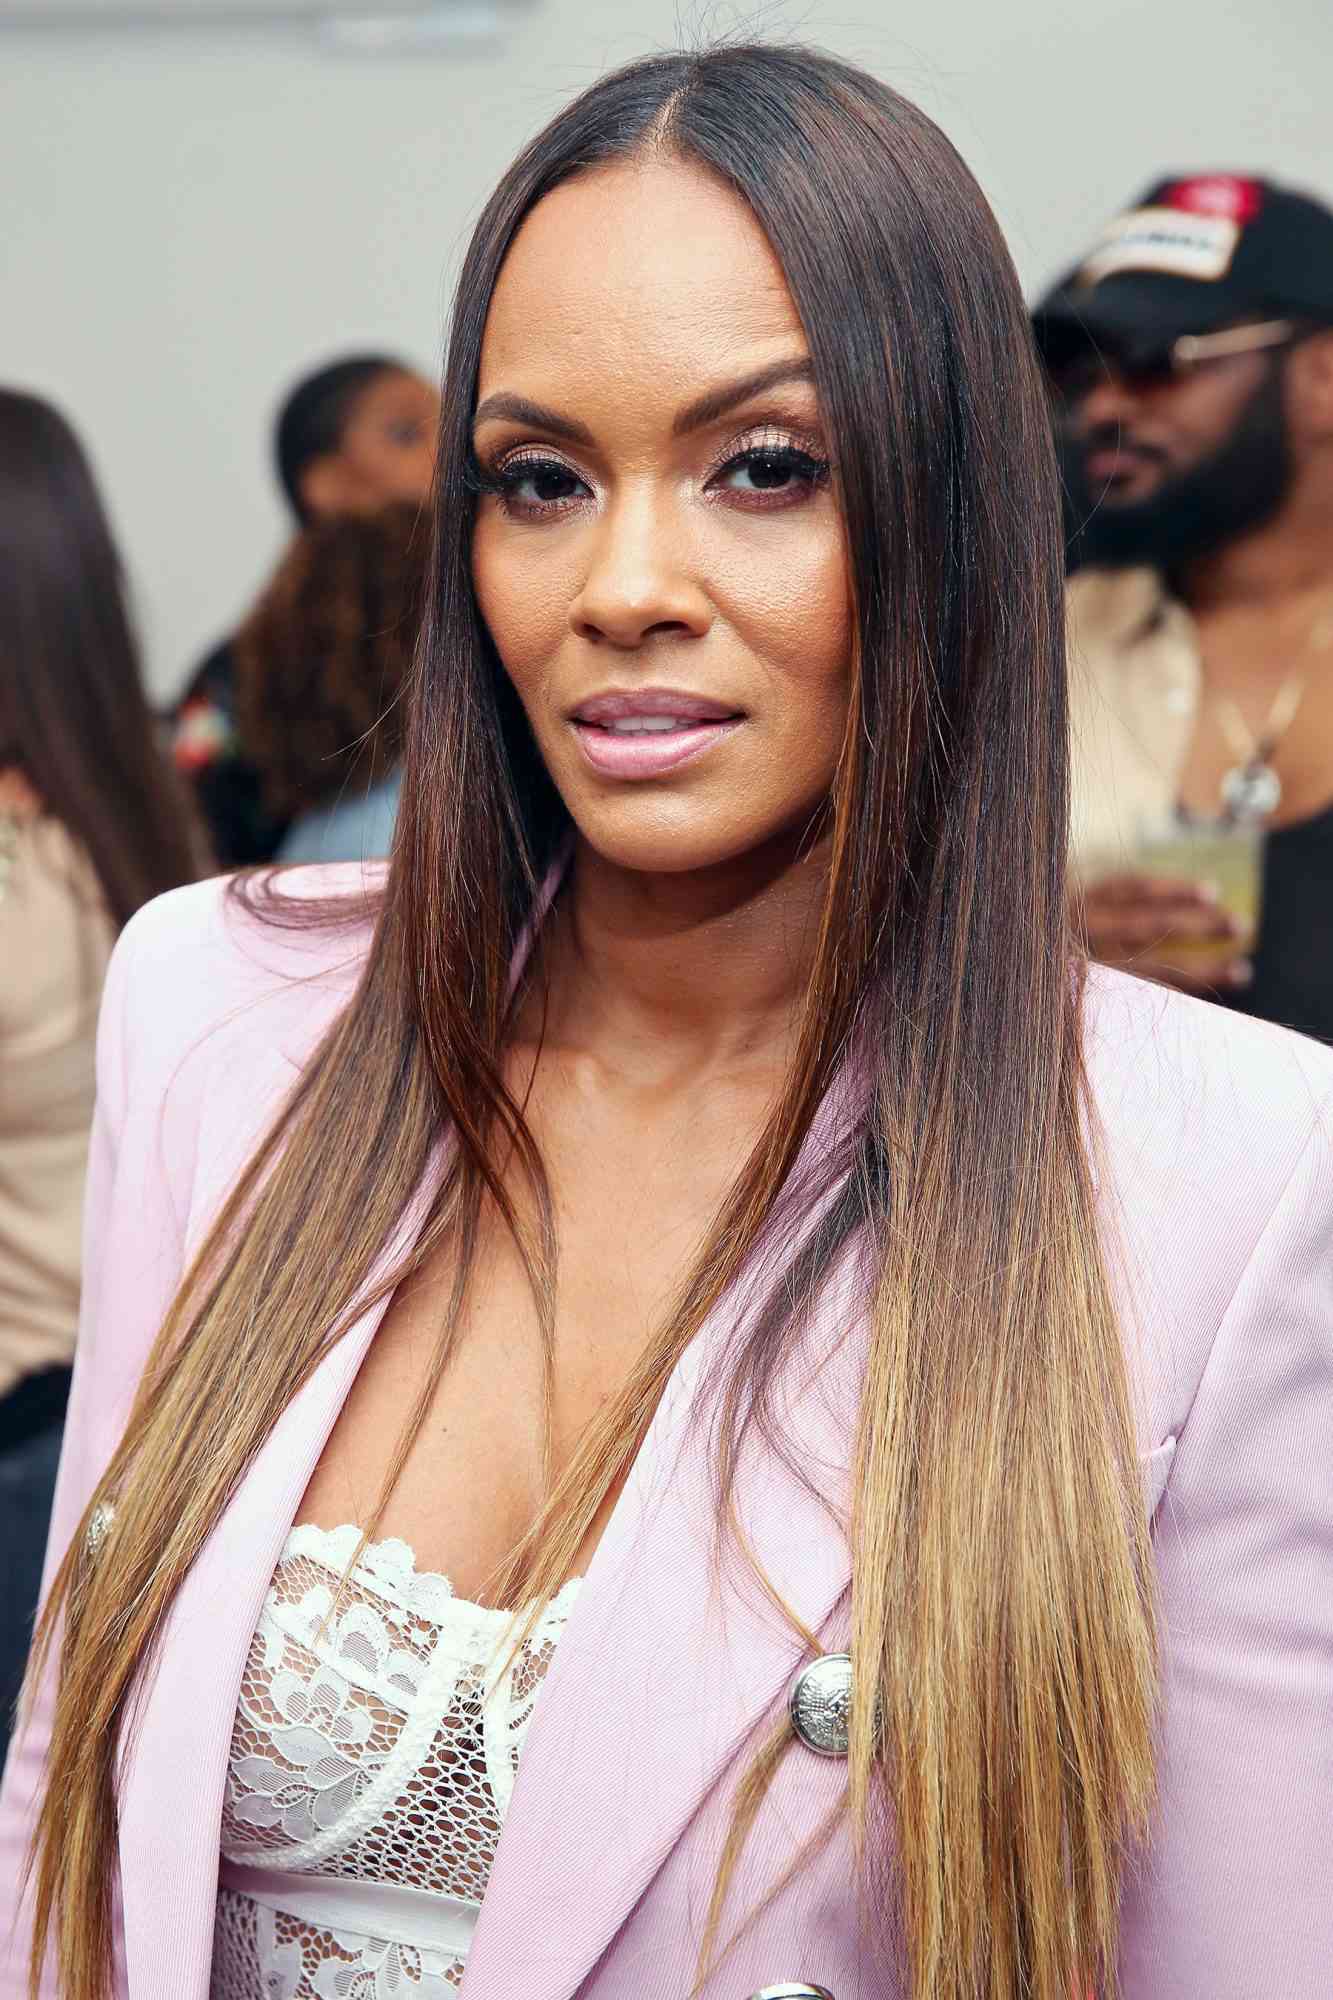 The 47-year old daughter of father (?) and mother(?) Evelyn Lozada in 2023 photo. Evelyn Lozada earned a  million dollar salary - leaving the net worth at  million in 2023